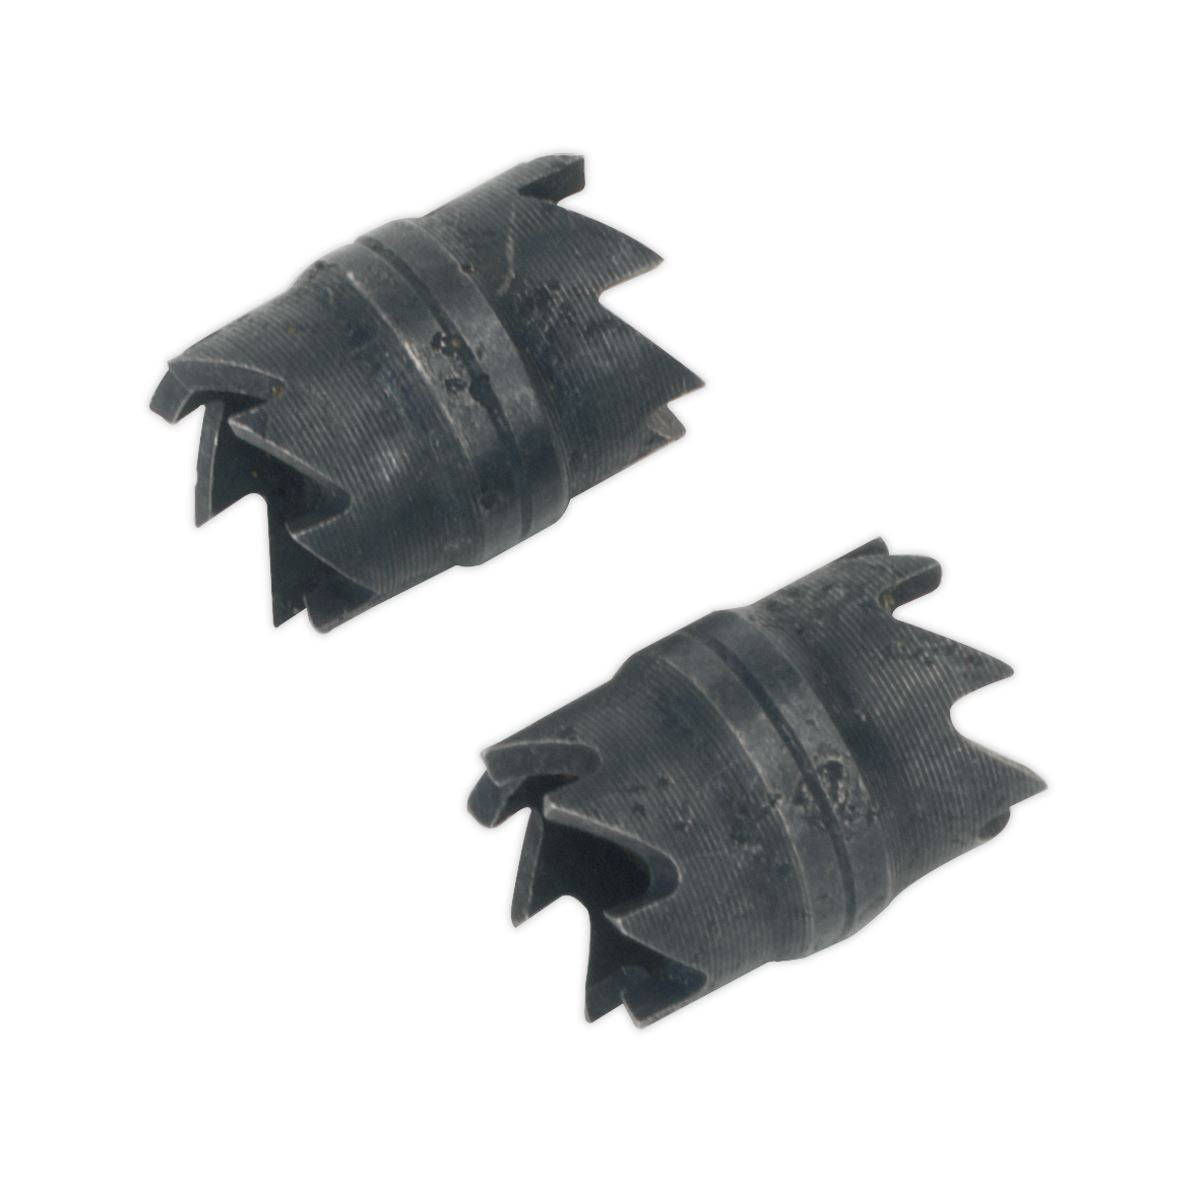 Sealey Spot Weld Cutter Crown Pack of 2